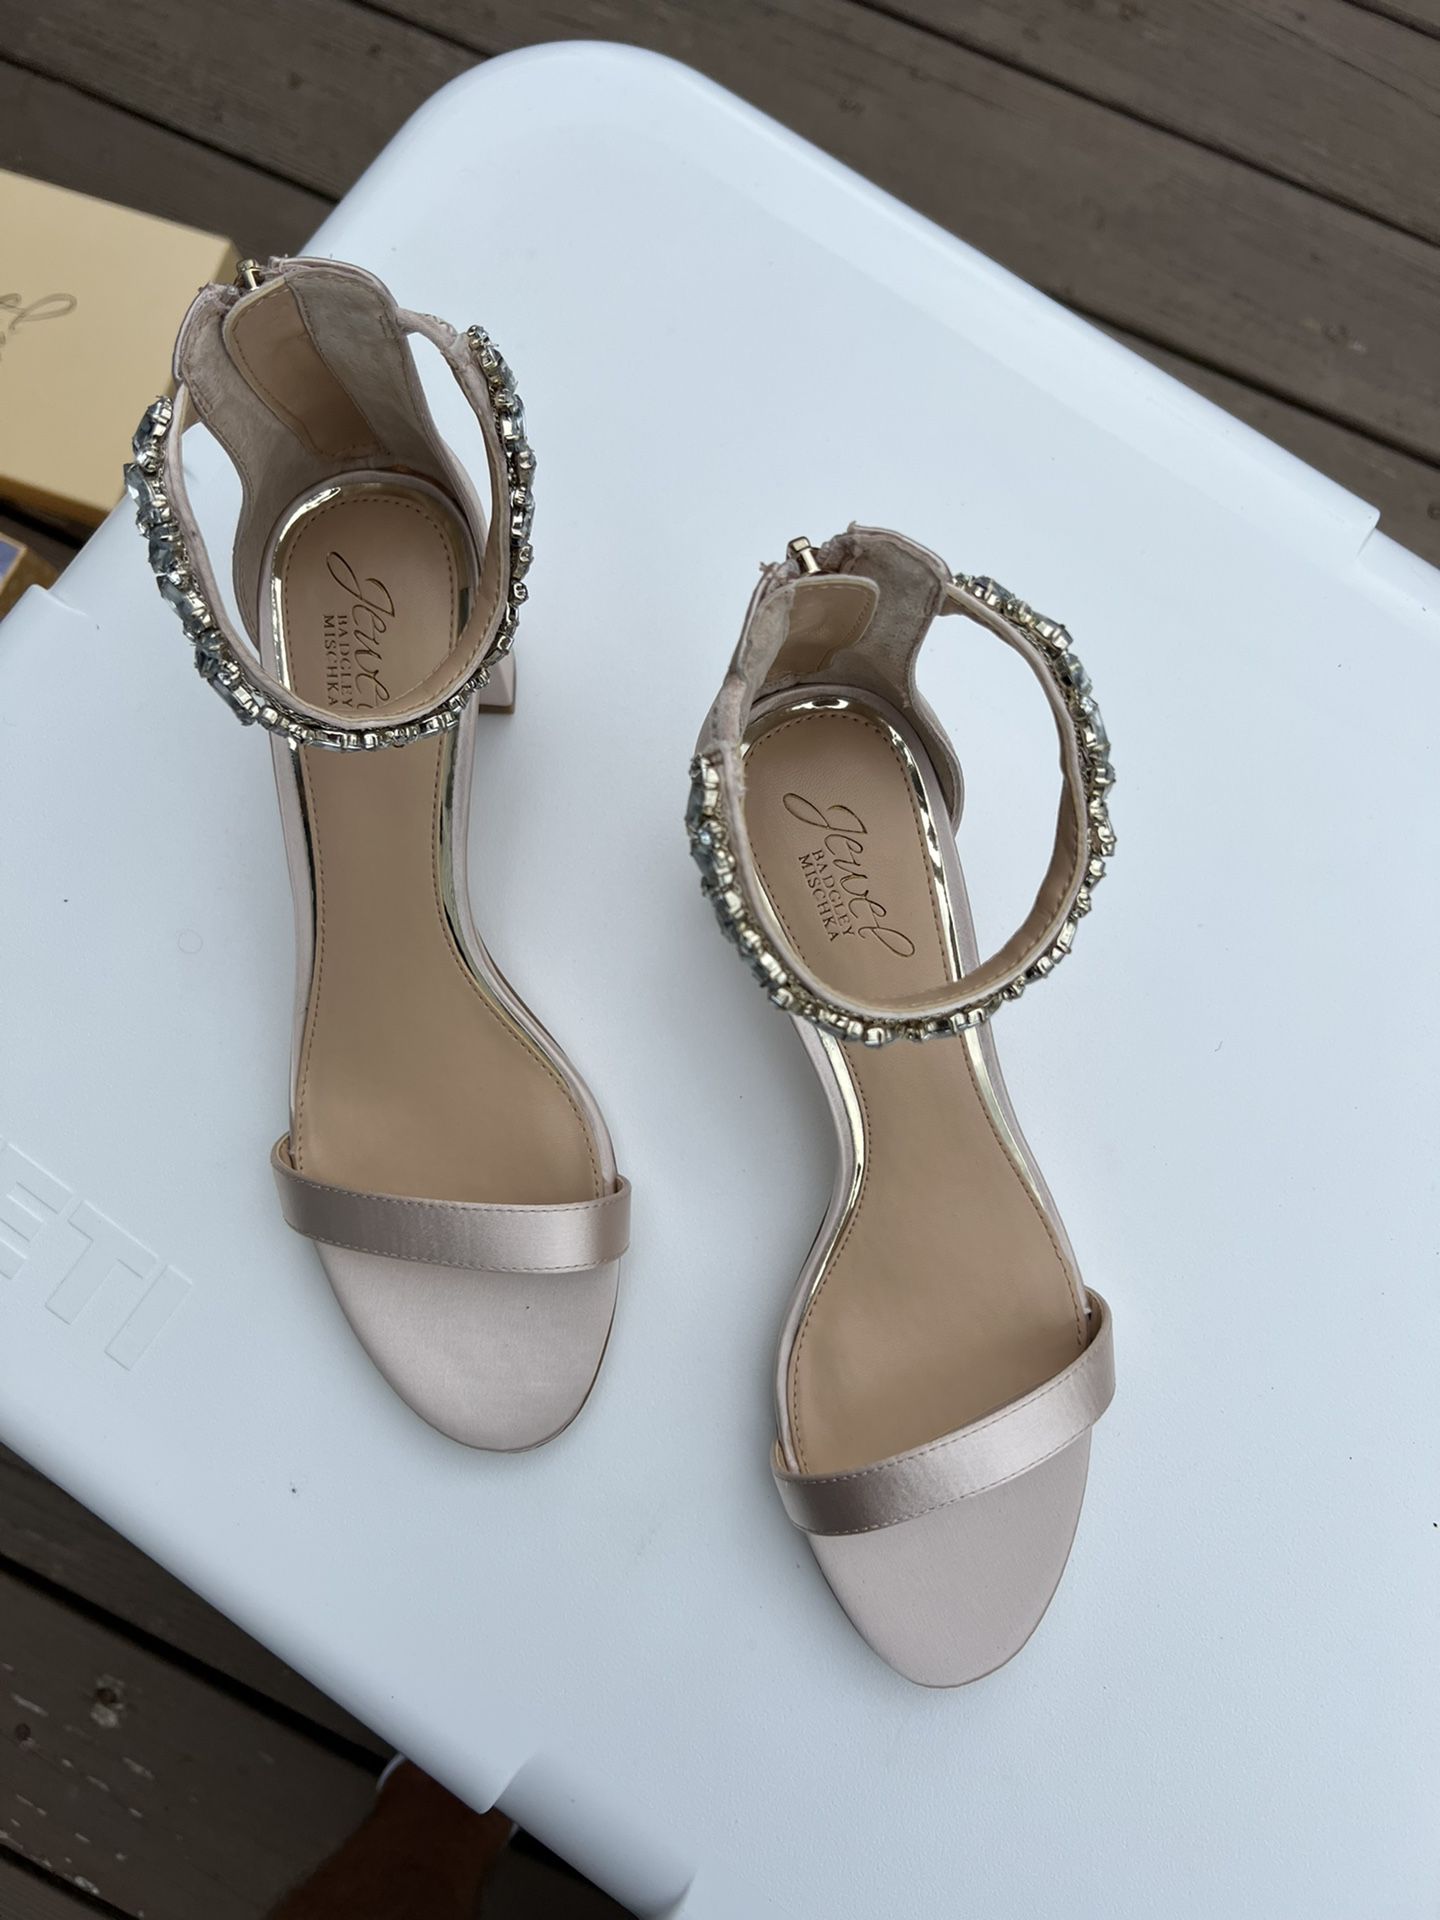 New Never Worn Wedding Shoes